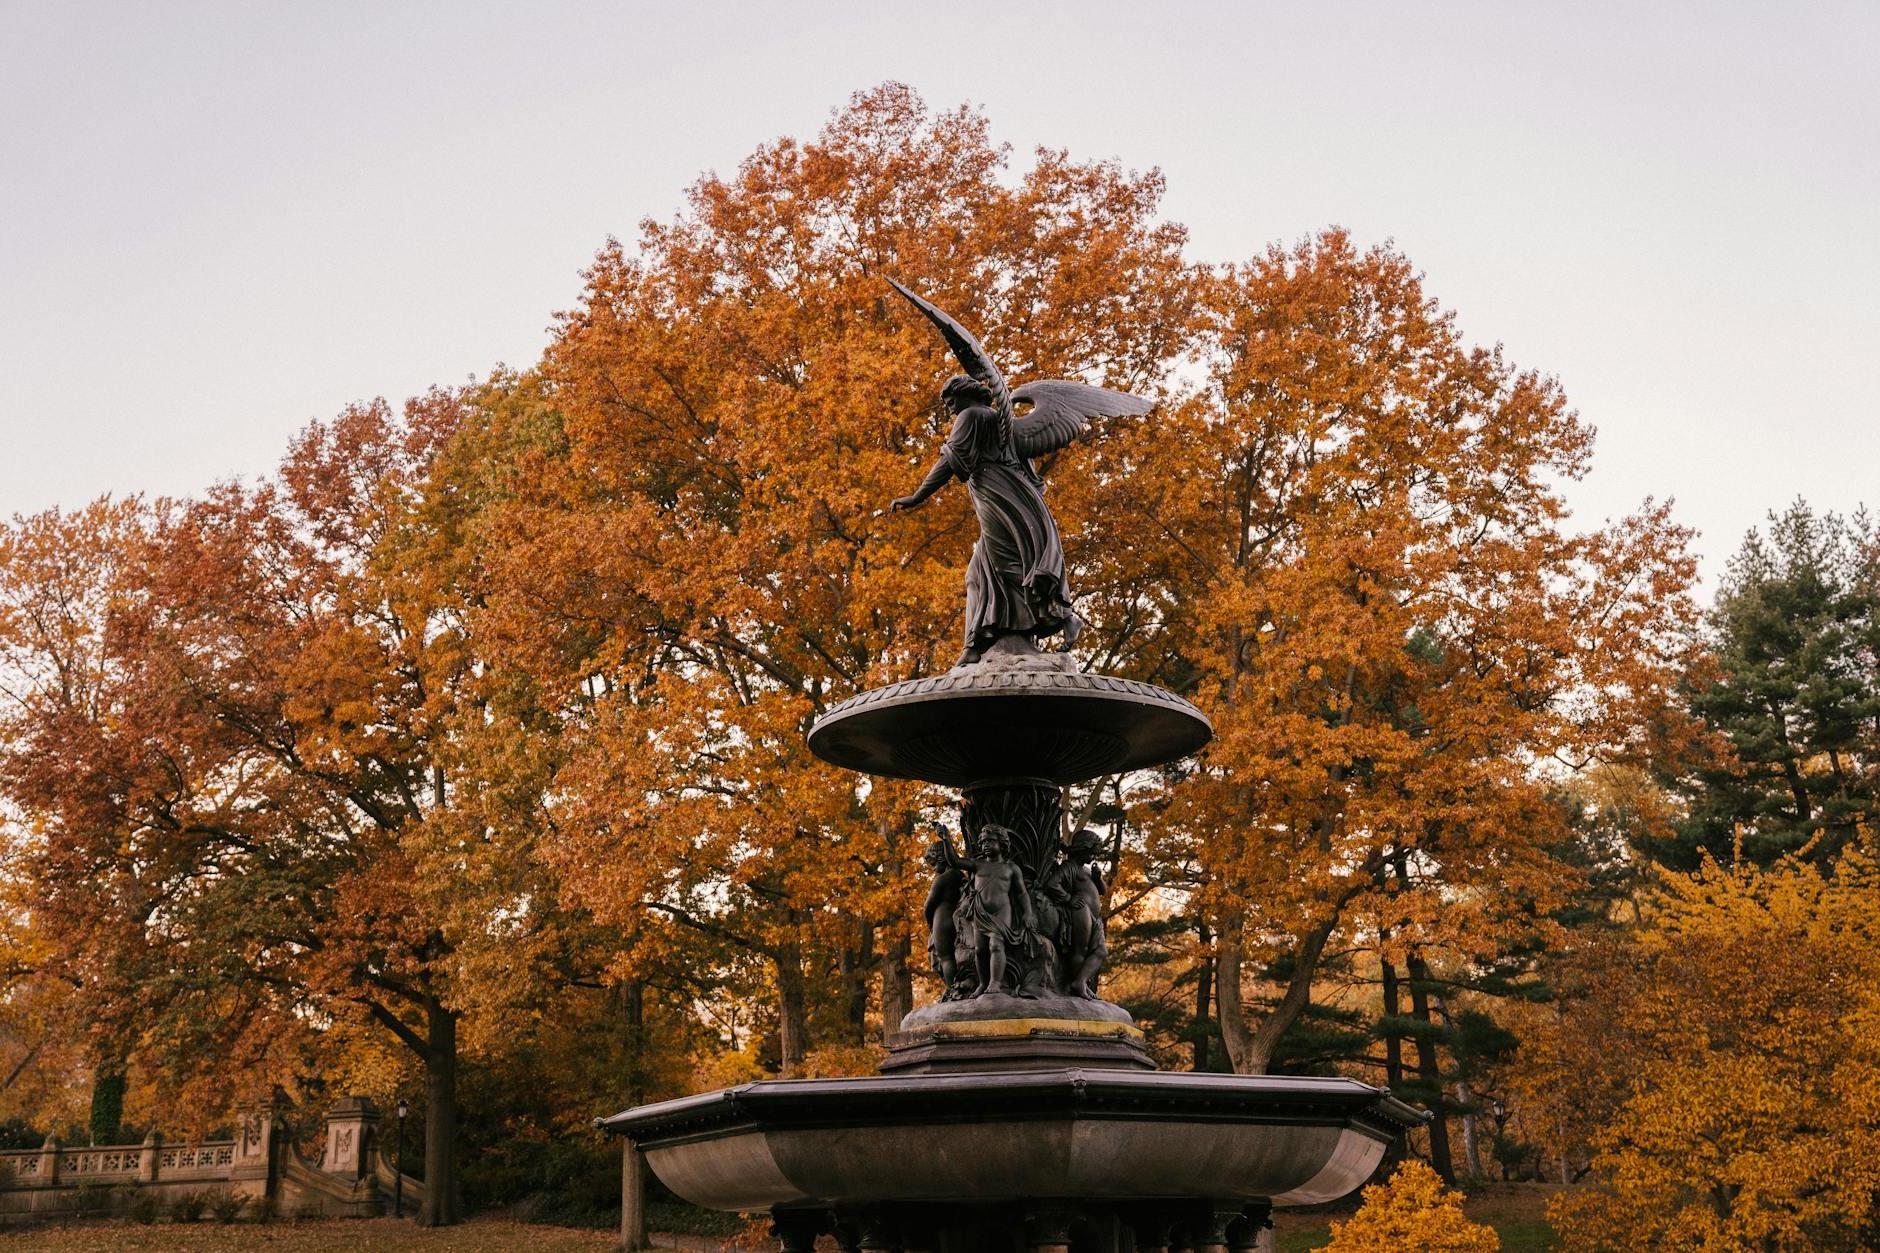 Fragment of Bethesda Fountain with Angel of the Waters statue placed in Central Park in New York City in America in autumn time